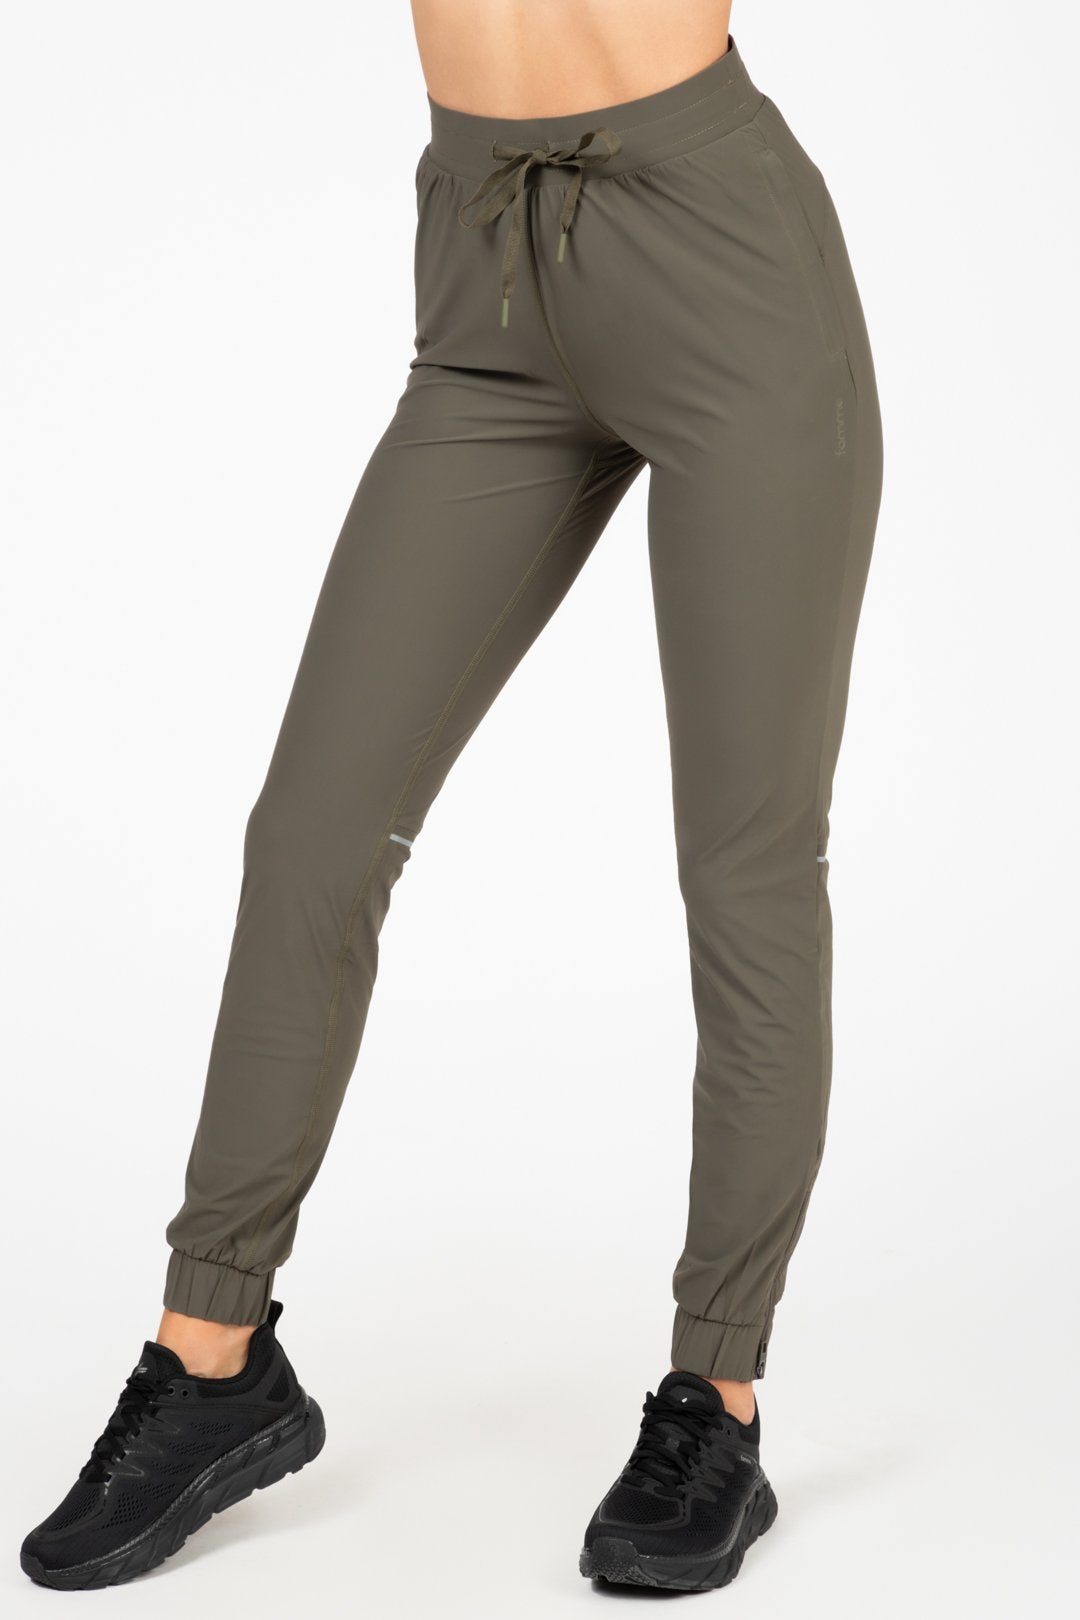 Green Active Pants - for dame - Famme - Pants